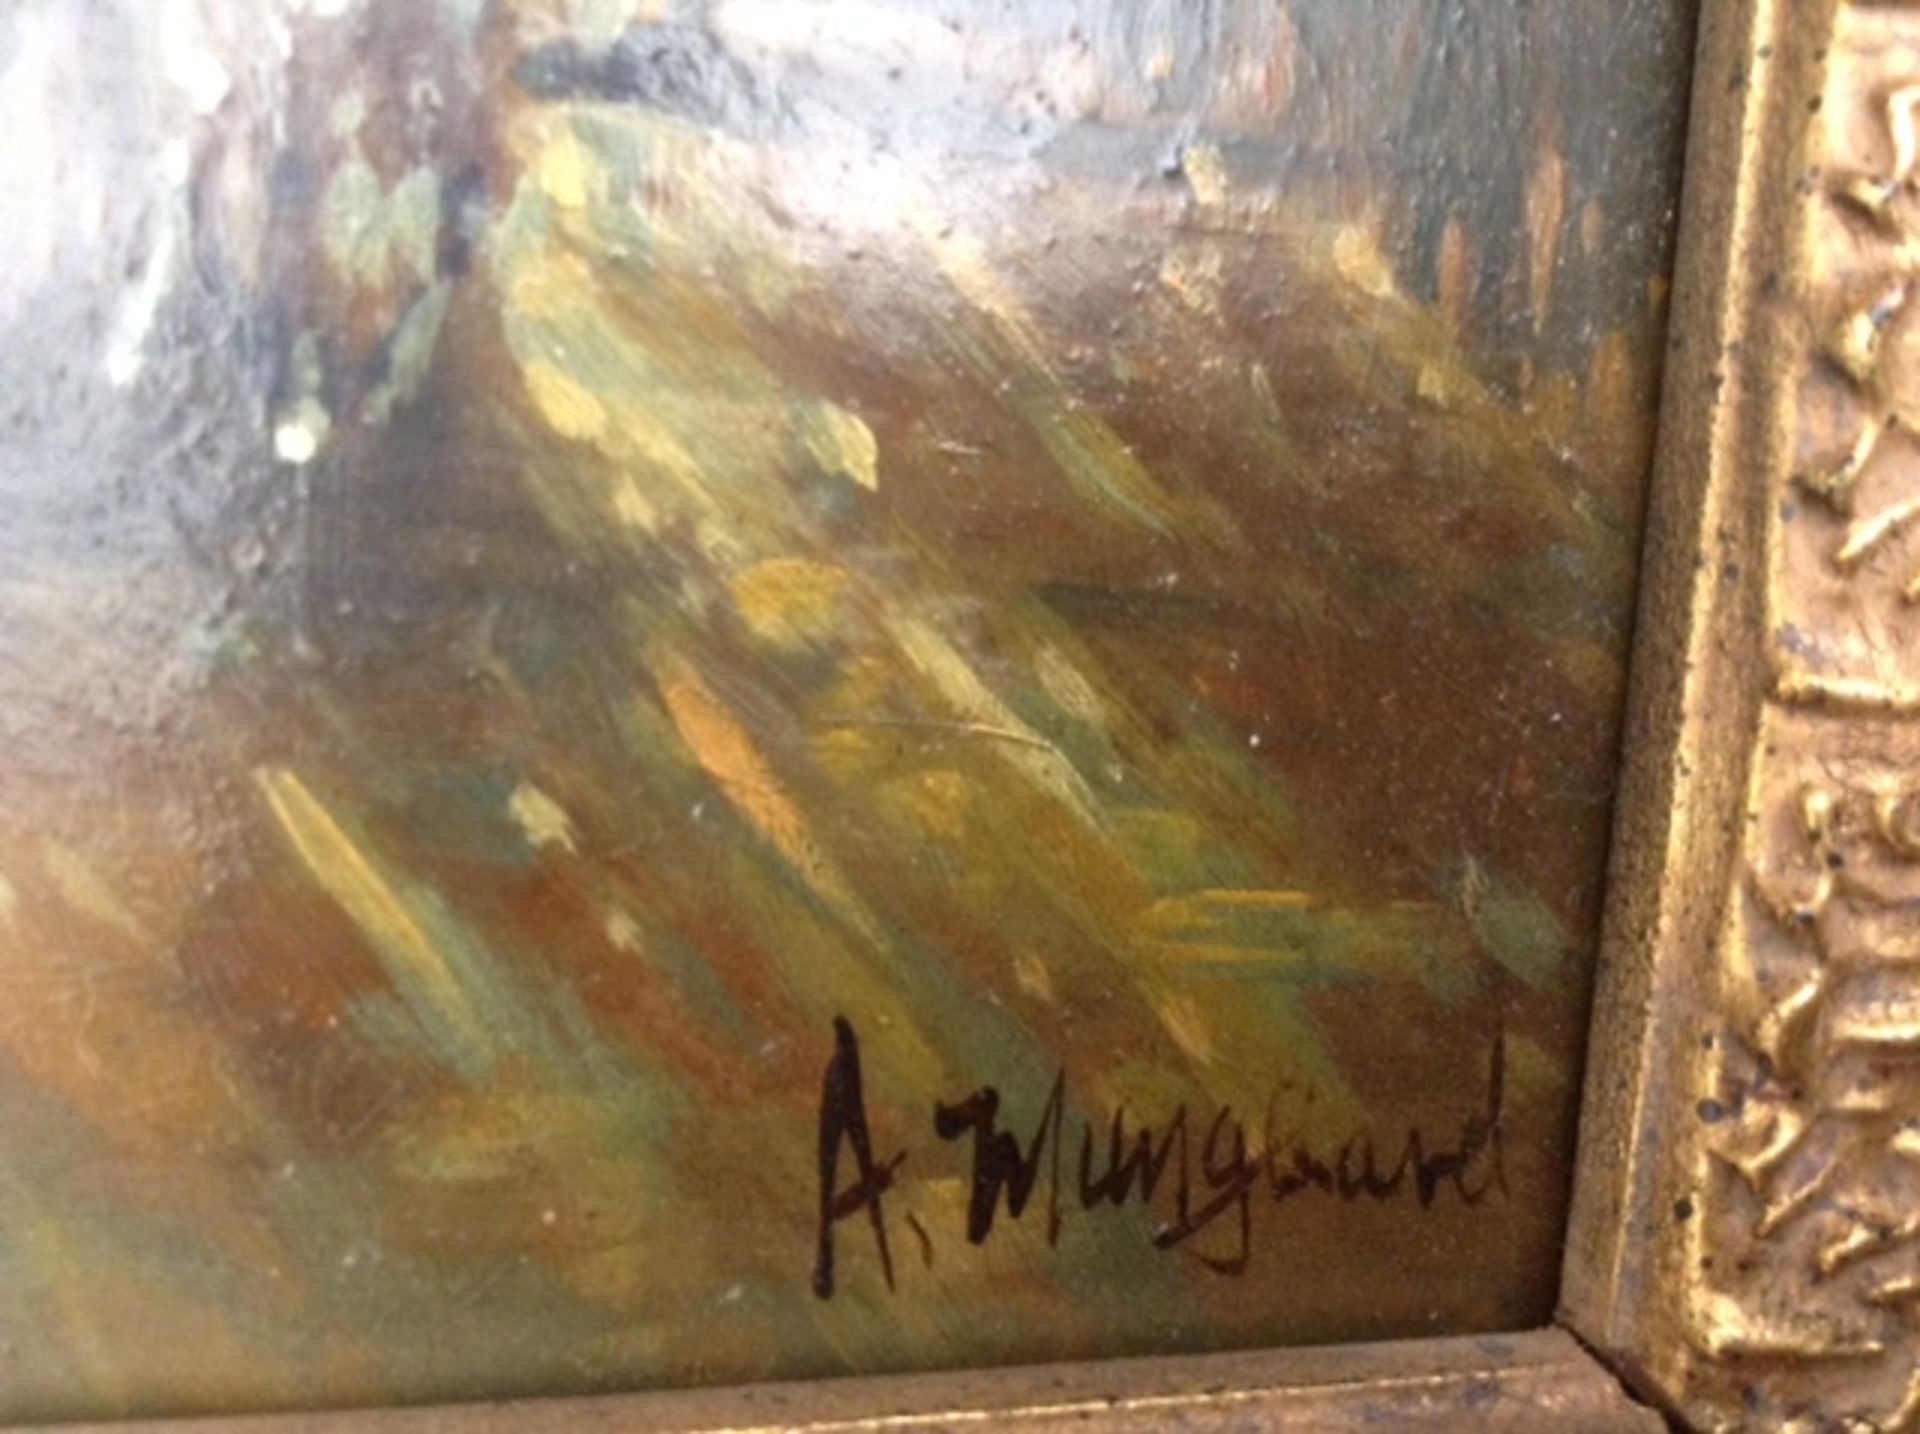 Original oil painting signed A Munghard.? - Image 3 of 4